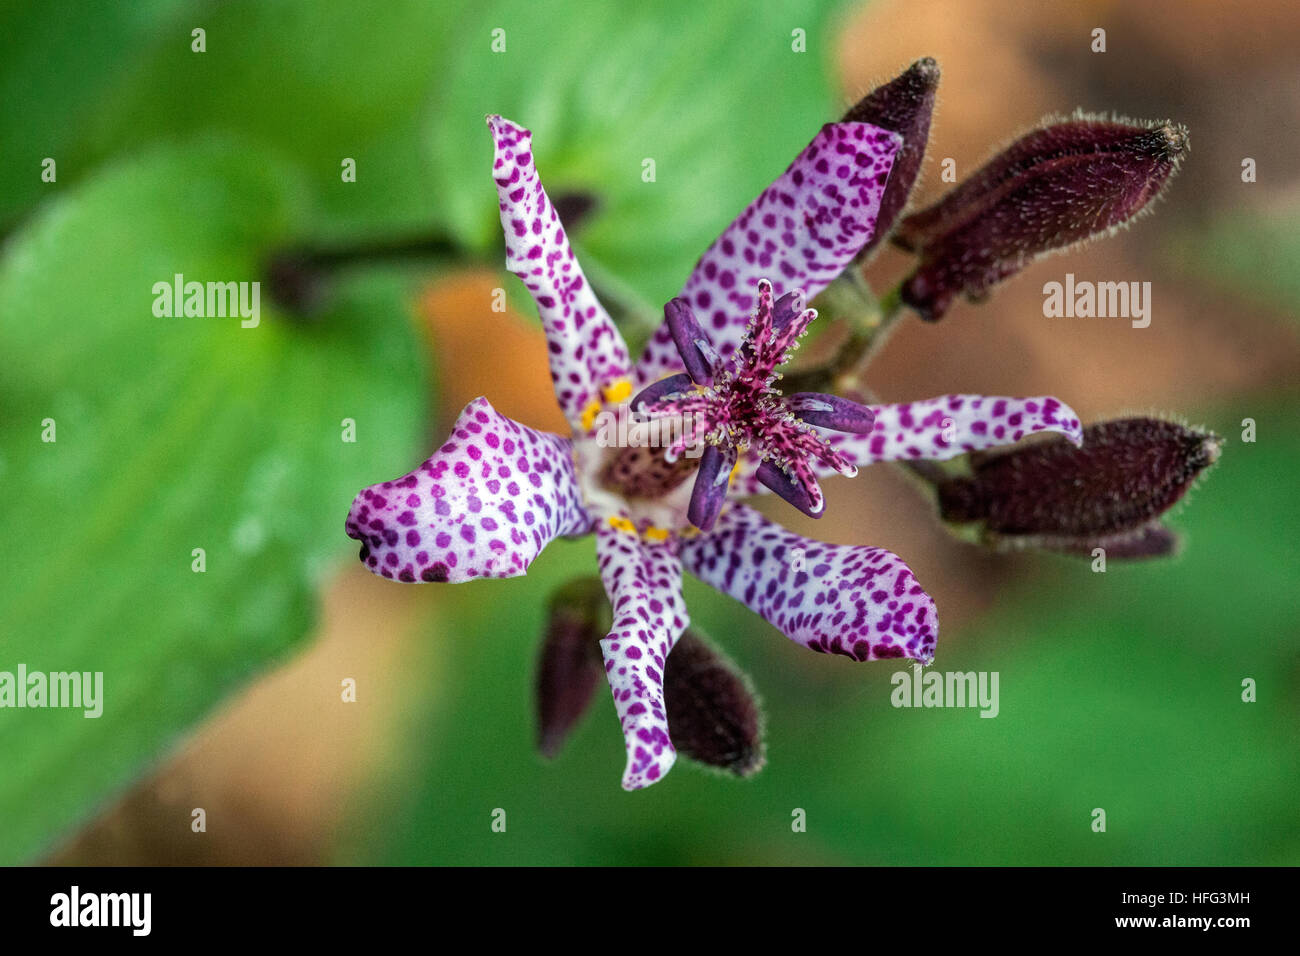 Tricyrtis hirta, the toad lily, or hairy toad lily Stock Photo